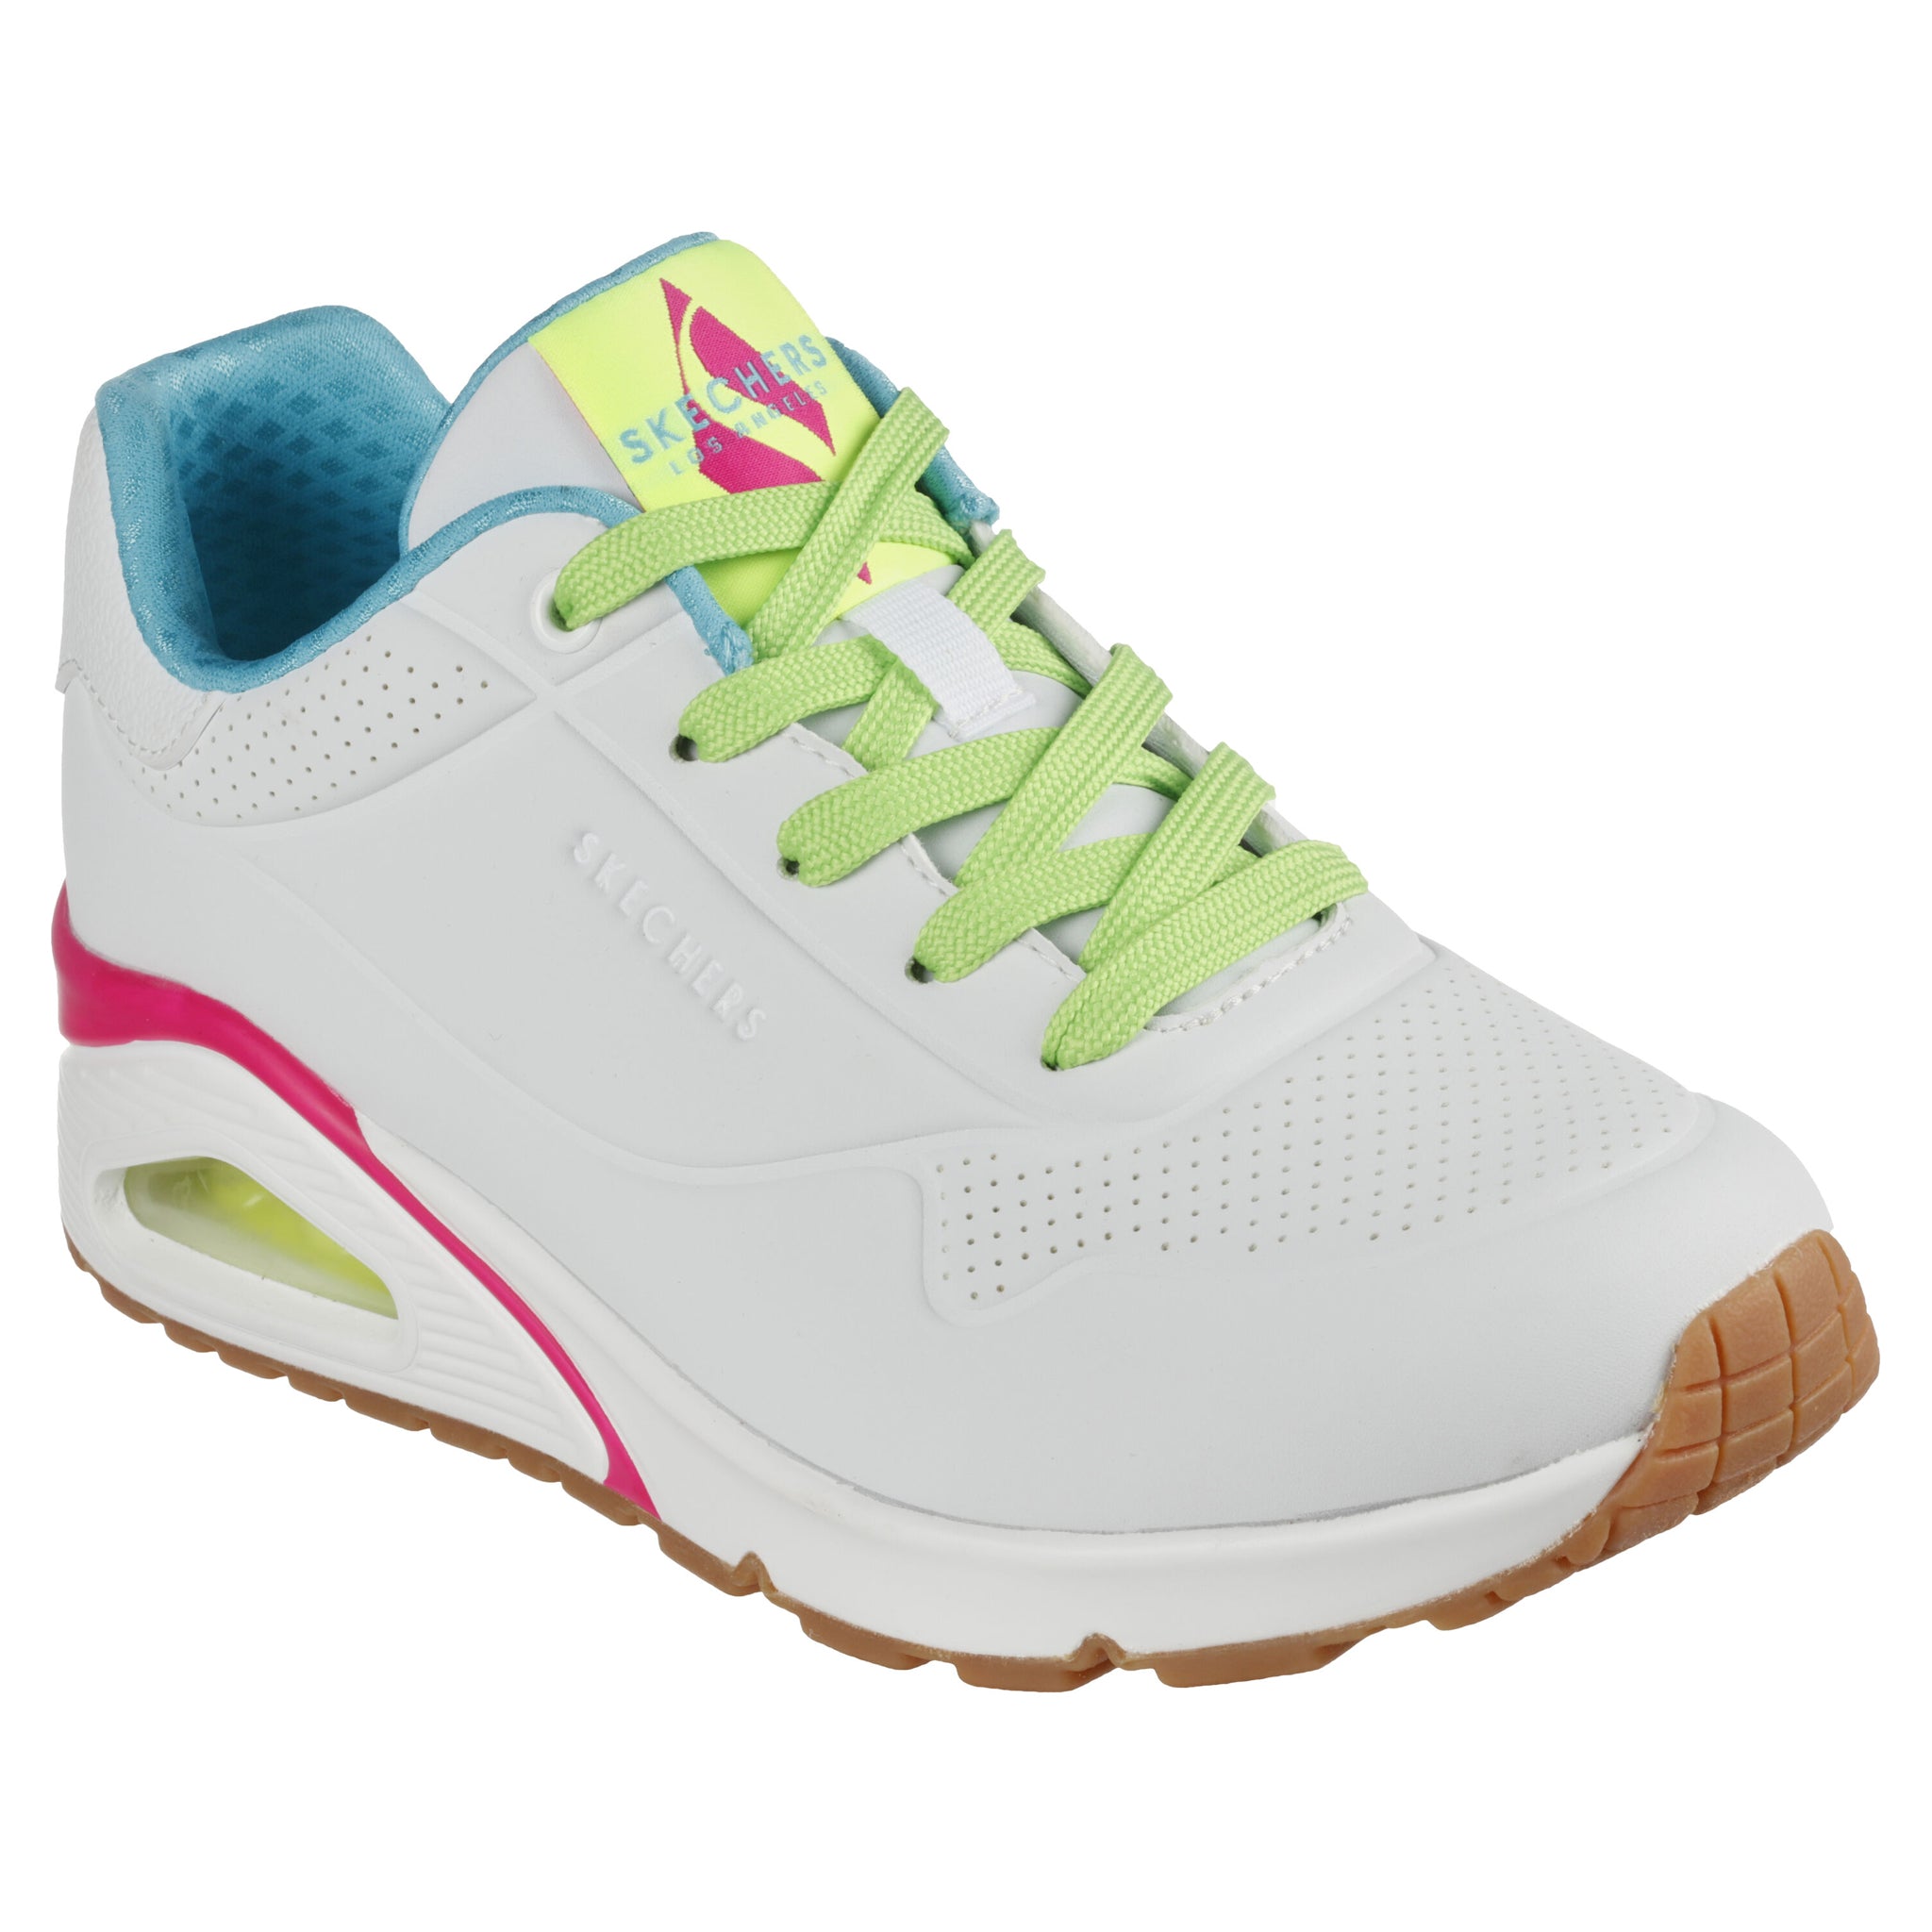 Women's 155184 Uno - Neano White/Multi Casual Shoes – That Shoe and More